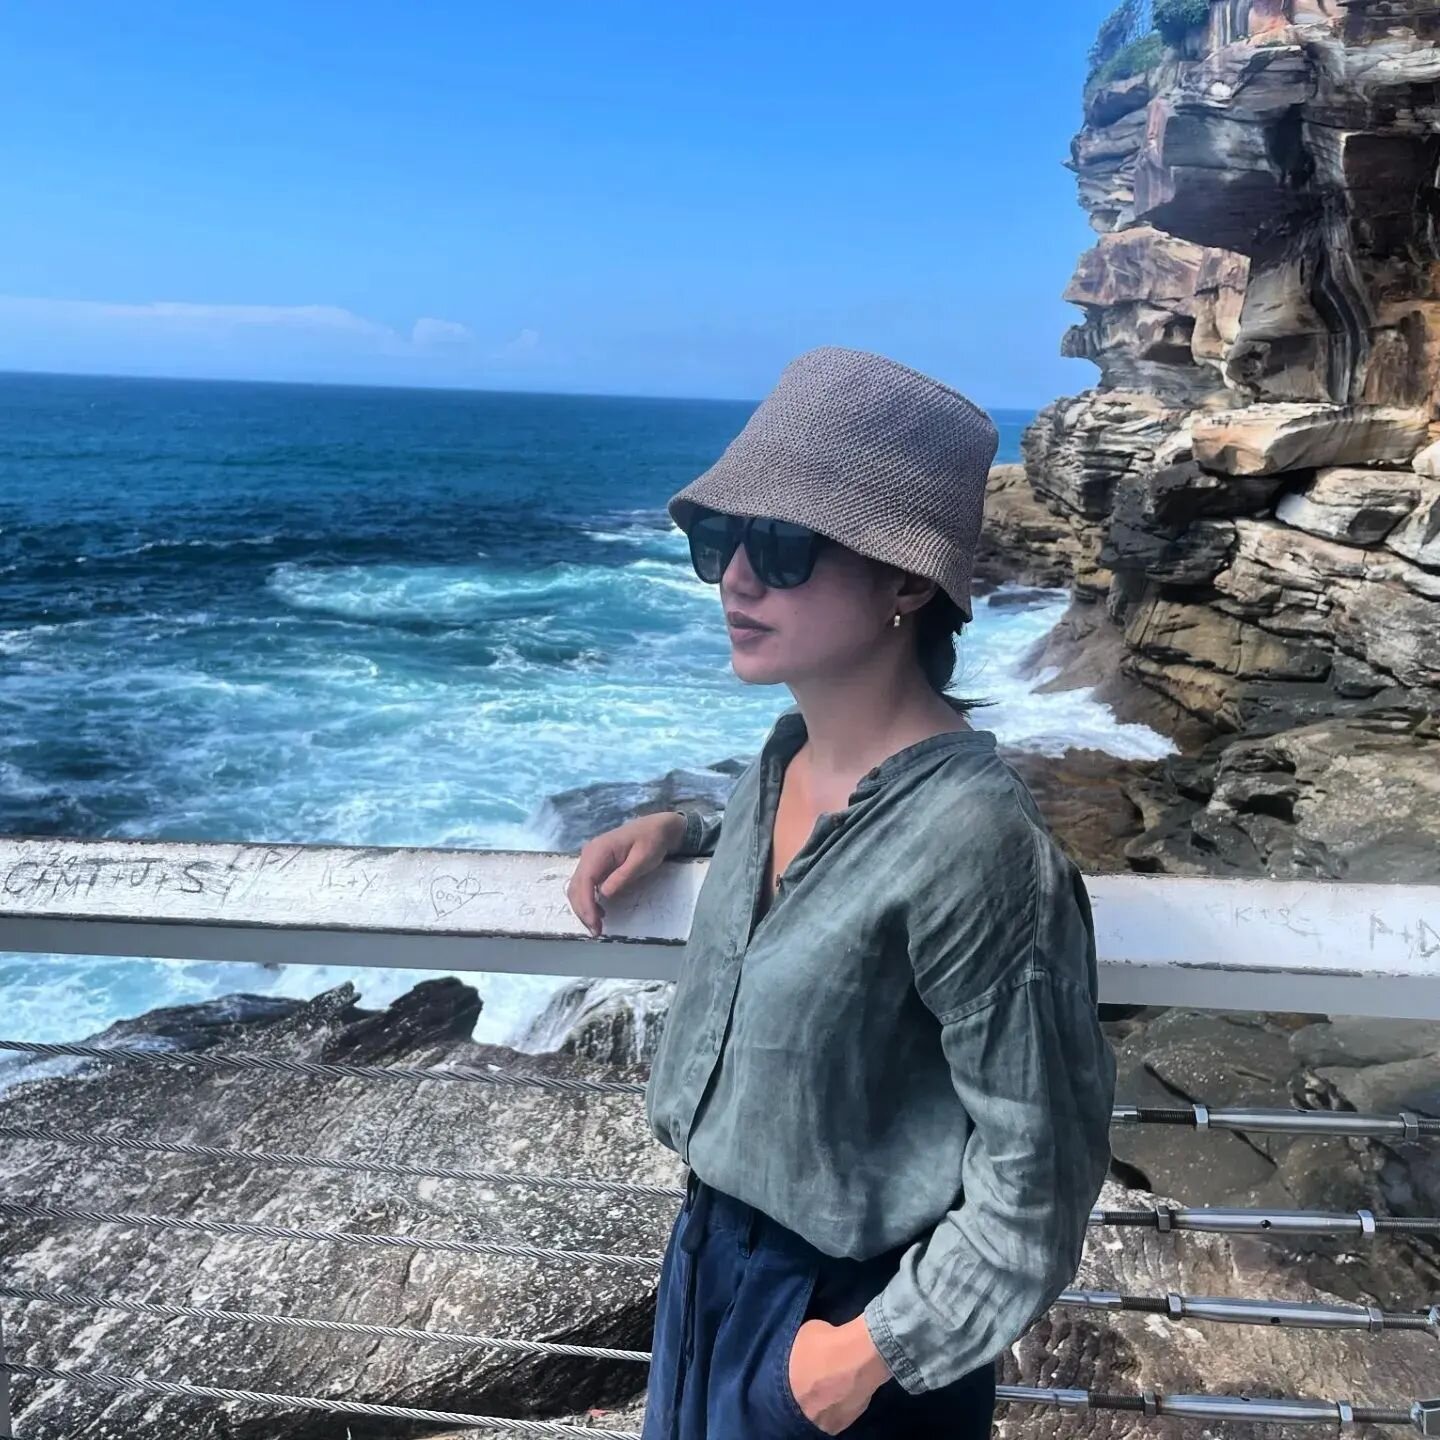 after exploring some of the spectacular surroundings of sydney, i am very much looking forward to some teaching here this week and next!

feb 24 - piano masterclass for advanced students
feb 25 - piano masterclass for advanced students 
feb 26 - comp